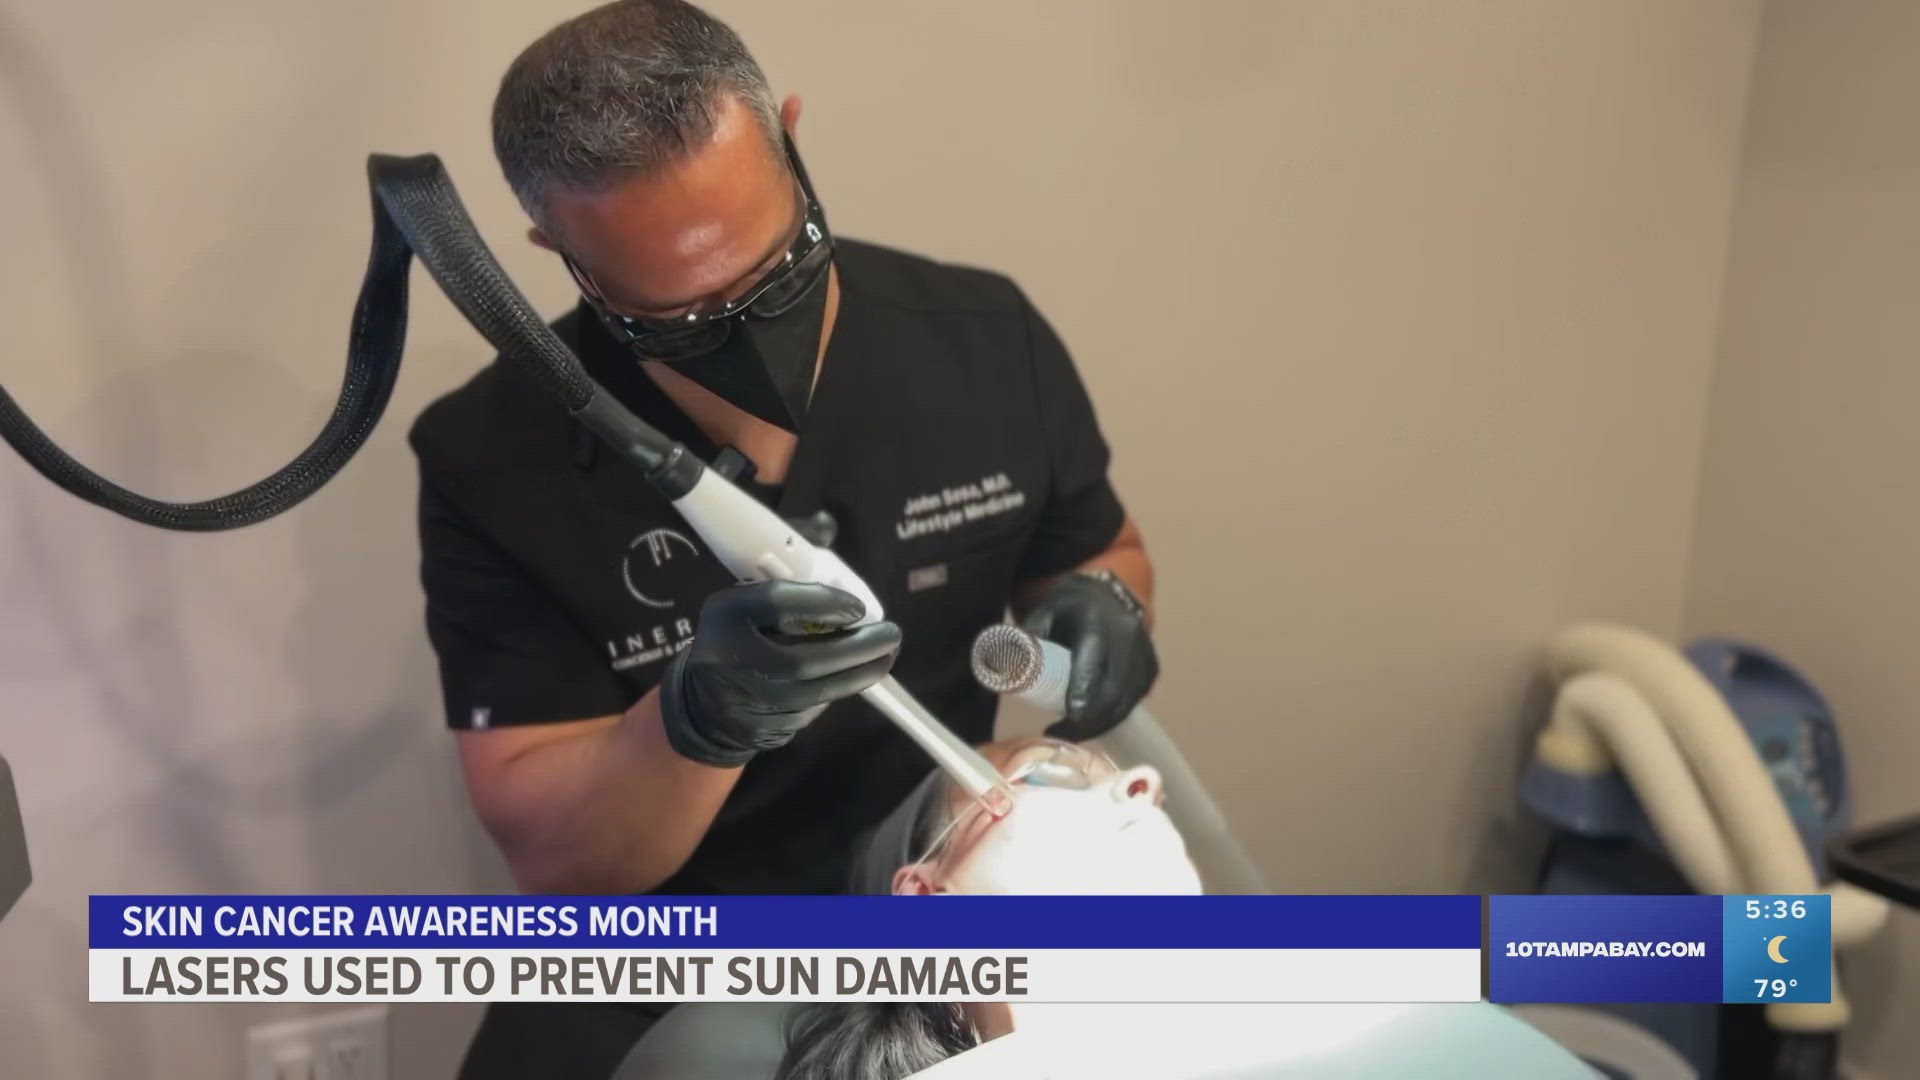 Dr. John Sosa uses an ultraclear laser, said to treat sun-damaged skin, remove pre-cancerous cells and reduce the risk of developing skin cancer.